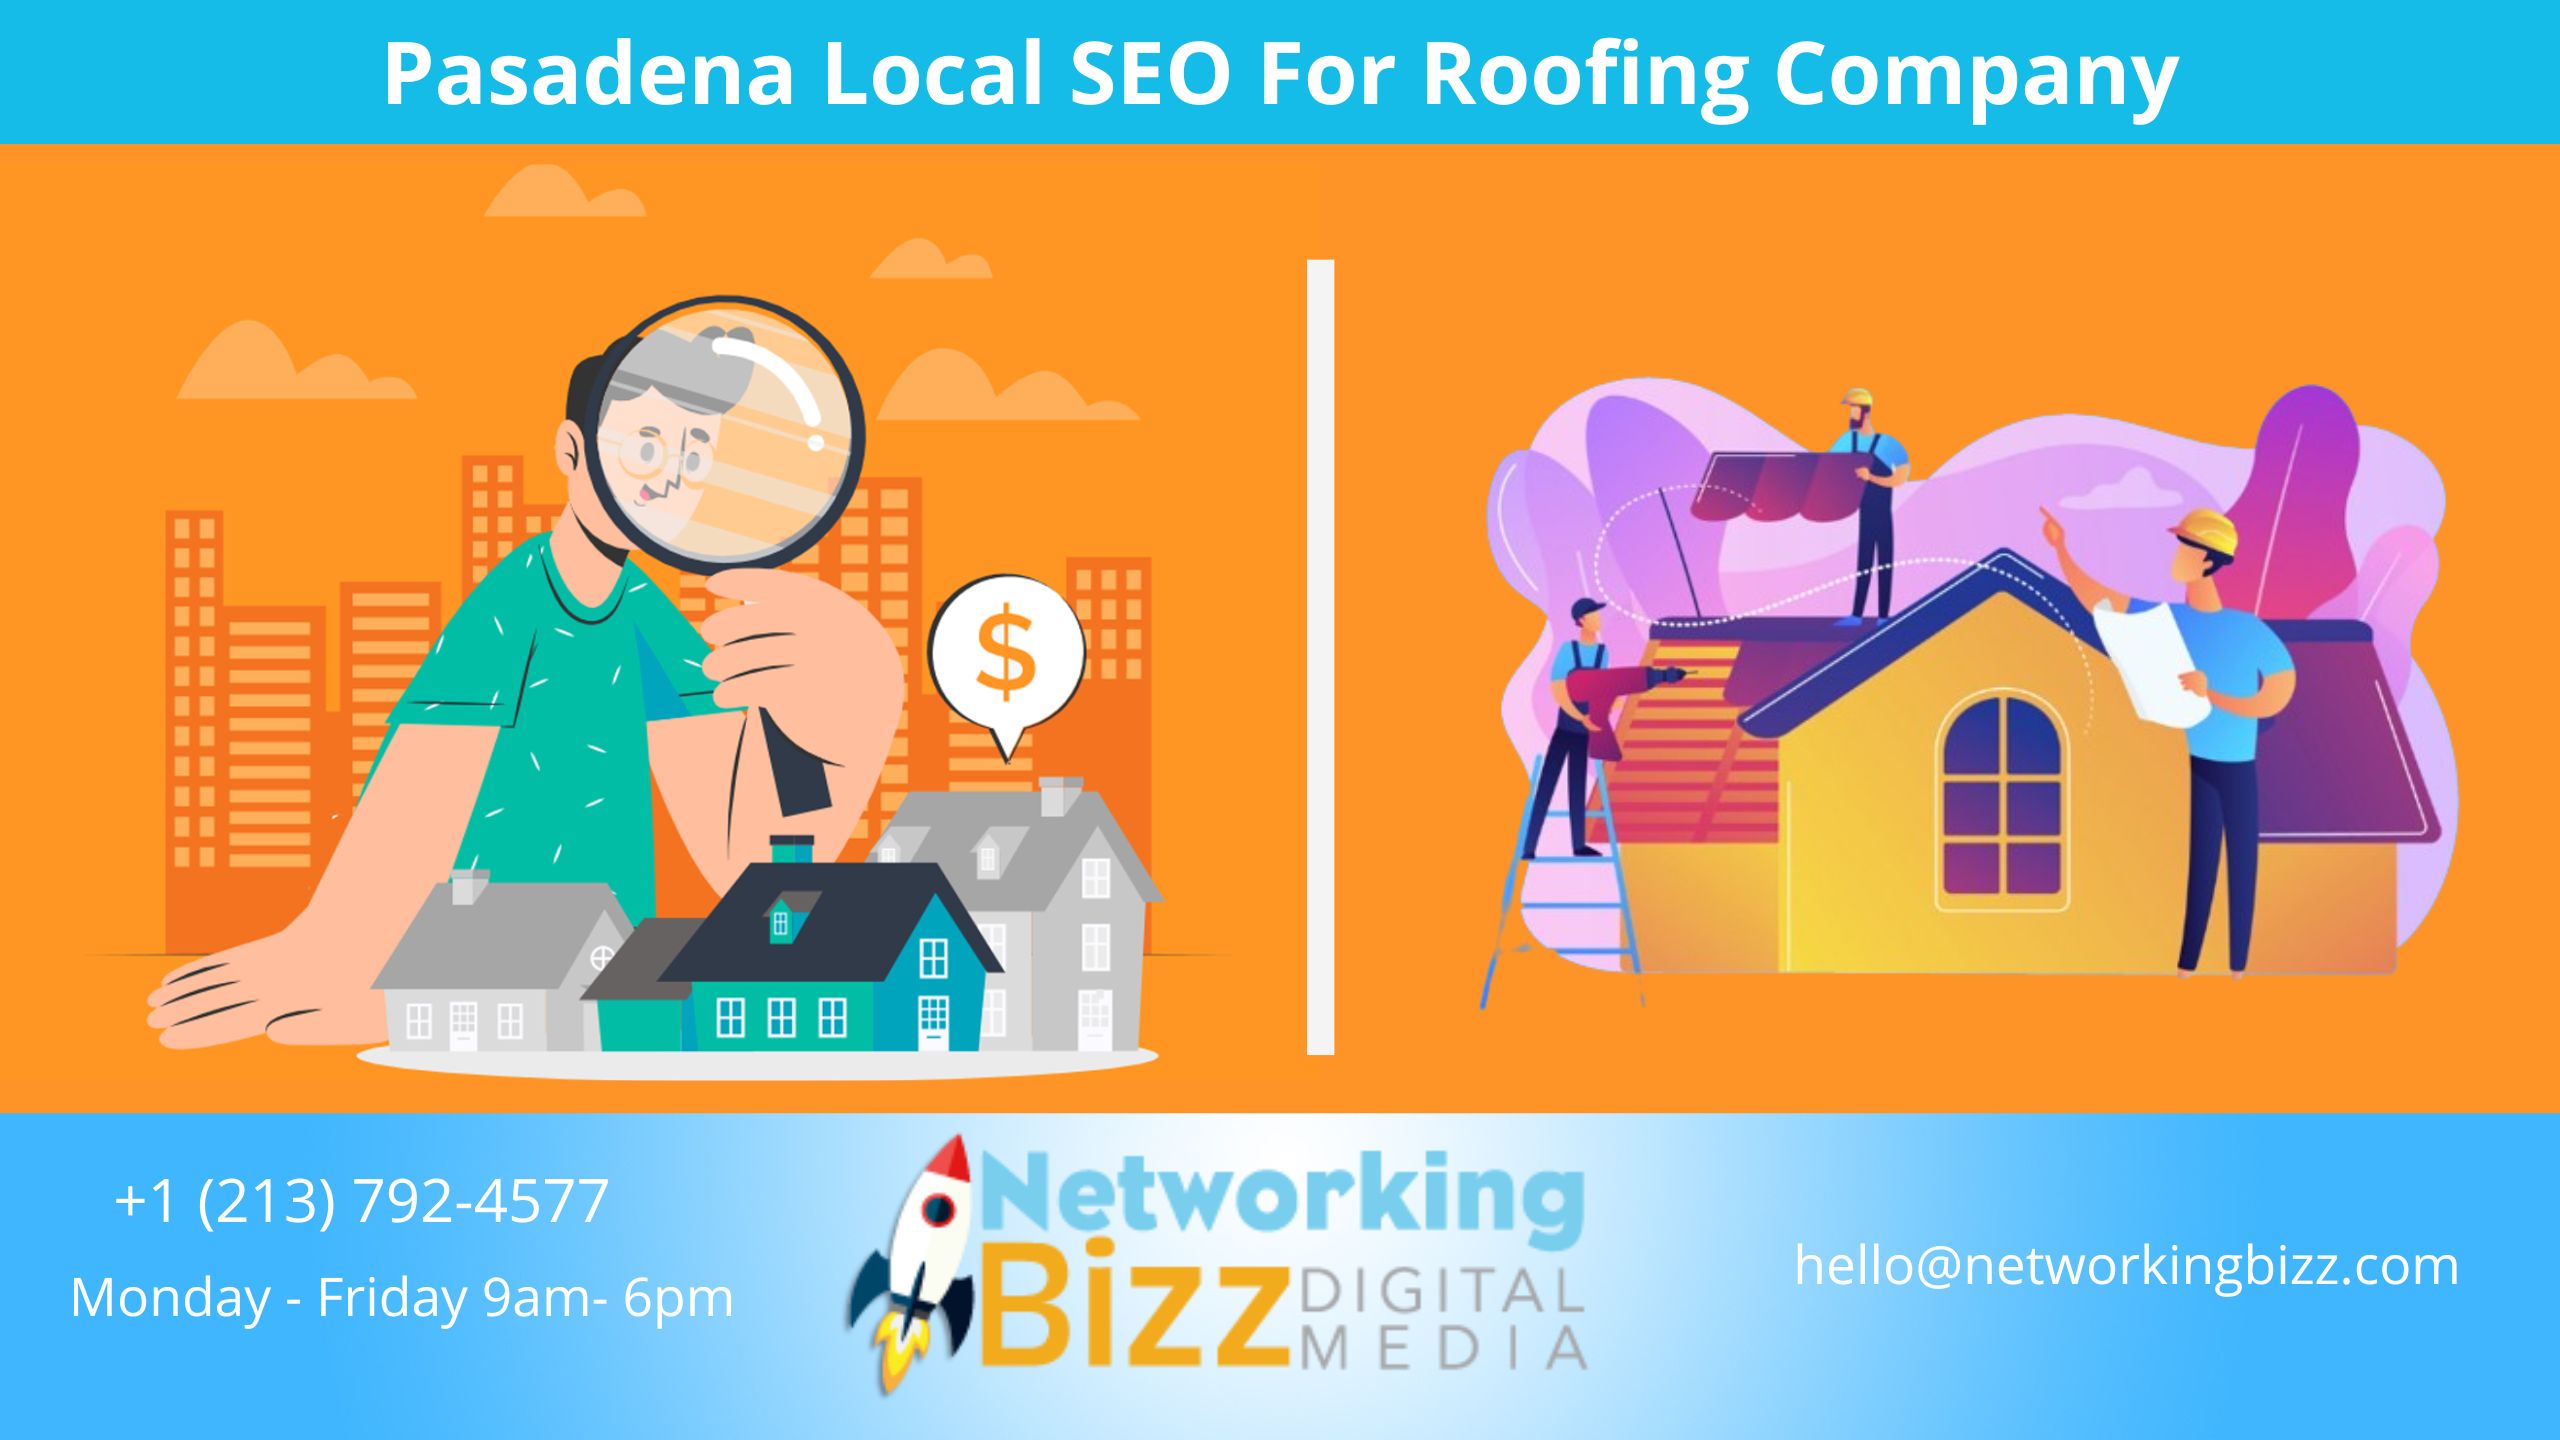 Pasadena Local SEO For Roofing Company